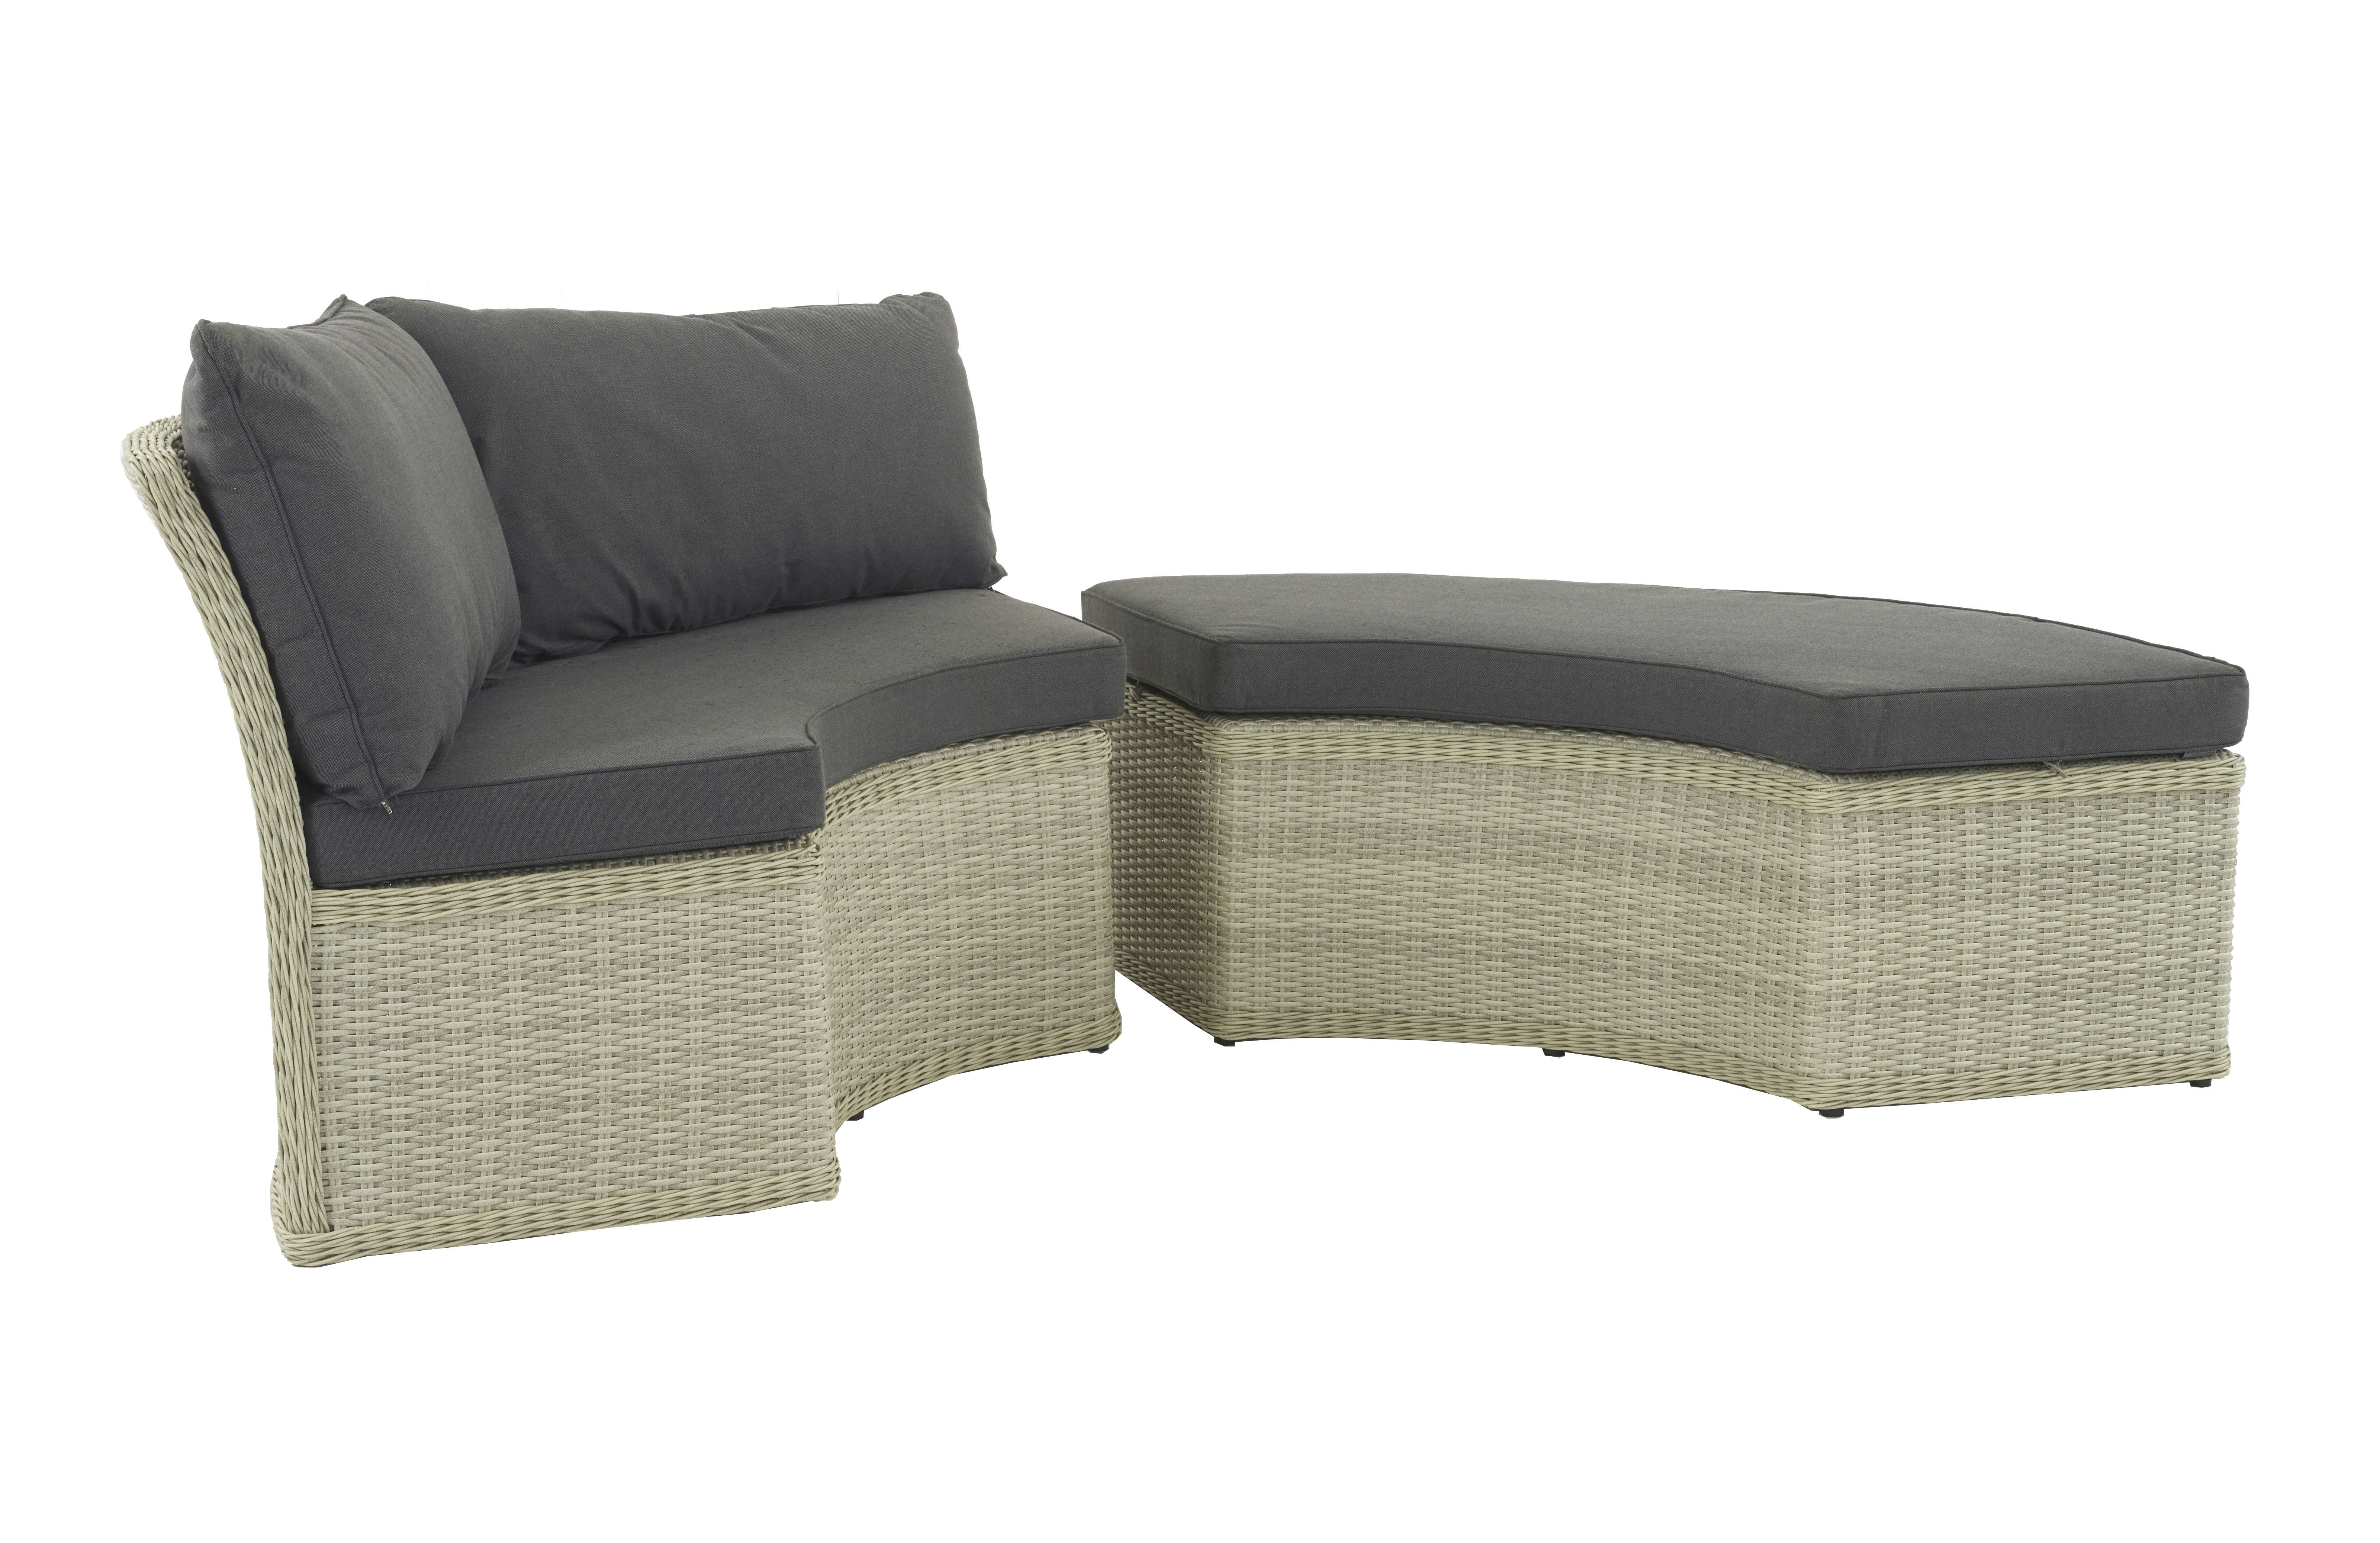 Set A504 Monterey Curved Sofa & Bench - Right (Dove Grey)